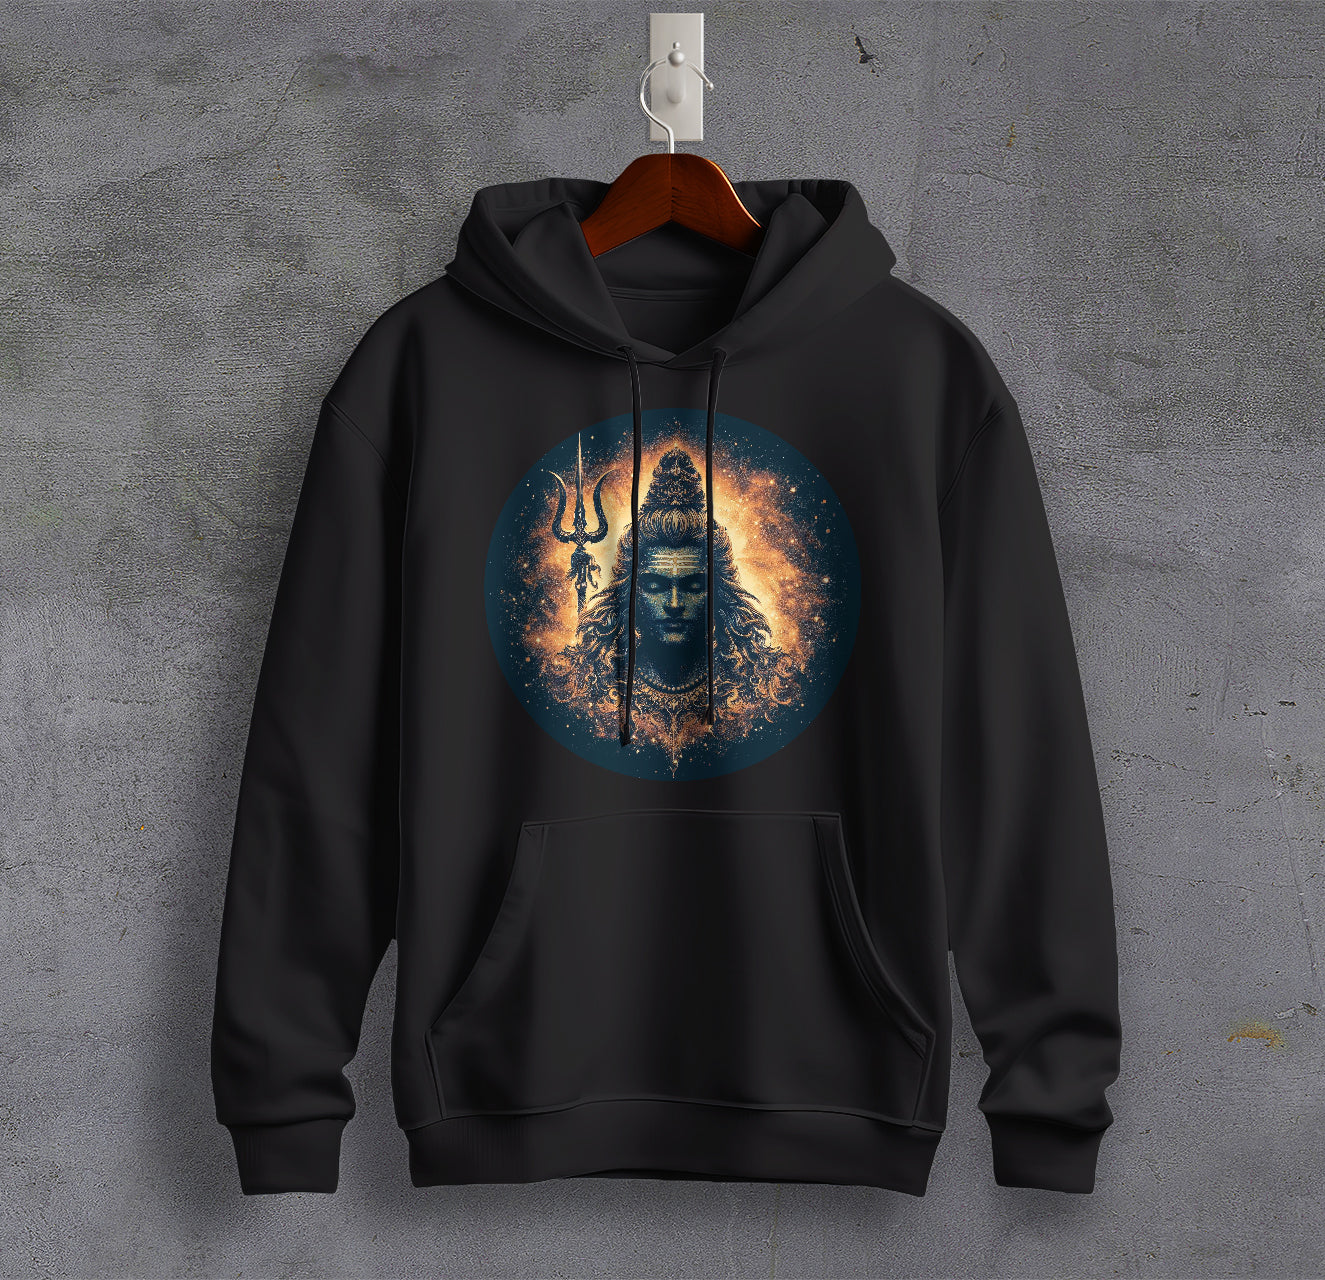 Blessings of Bholenath Graphic Printed Cotton Sweatshirt for Men Trinity Collection 🔱🔱🔱